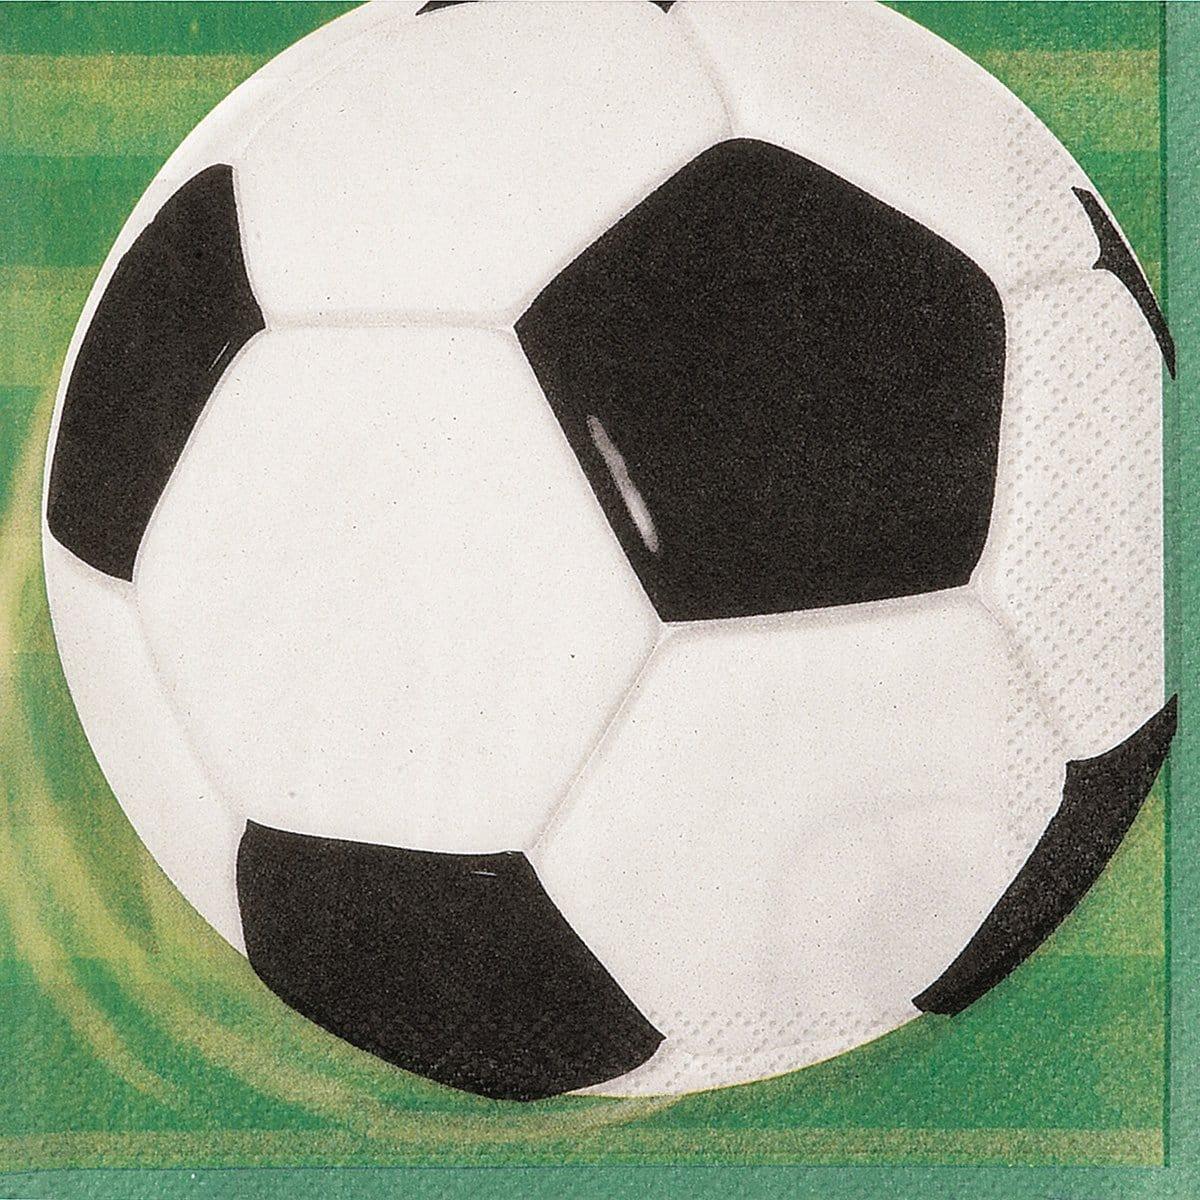 Buy Theme Party 3D Soccer Lunch Napkins, 16 per Package sold at Party Expert